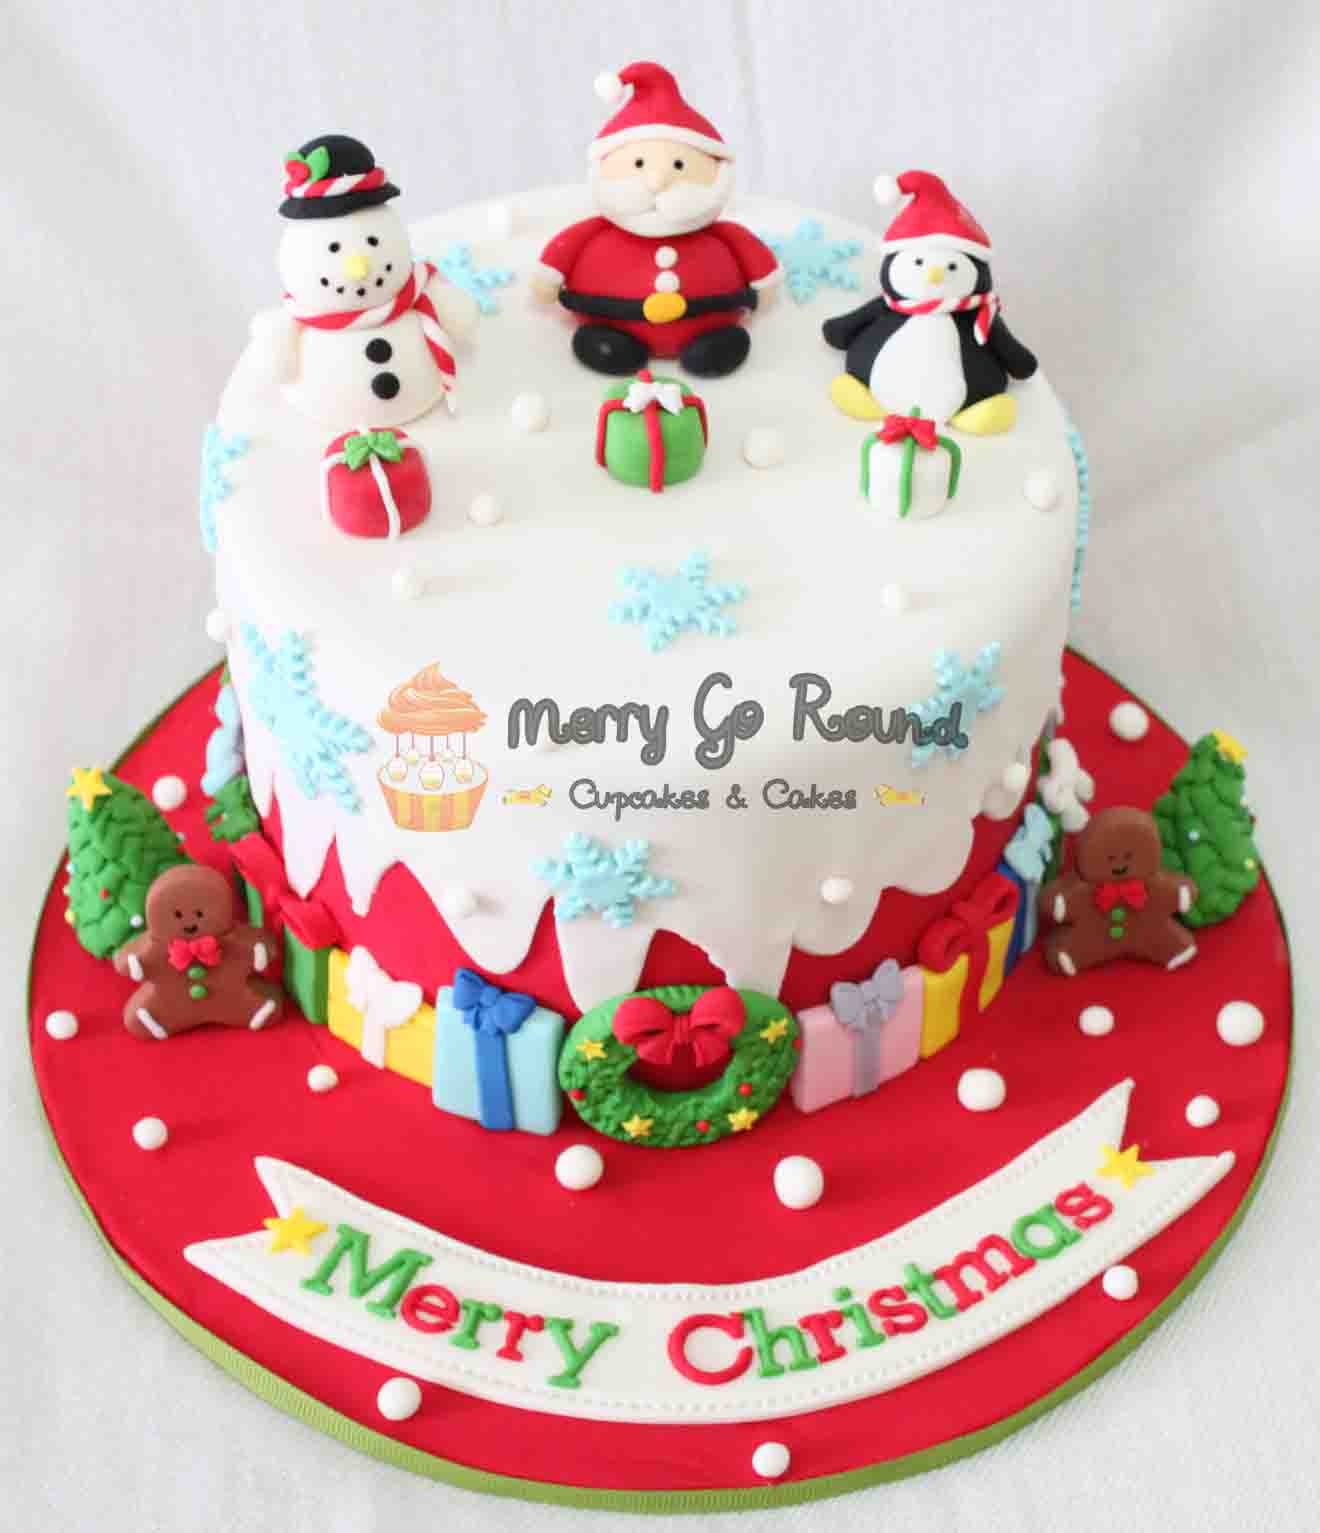 PicturesPool: Christmas Cakes Pictures | Christmas Cakes ...